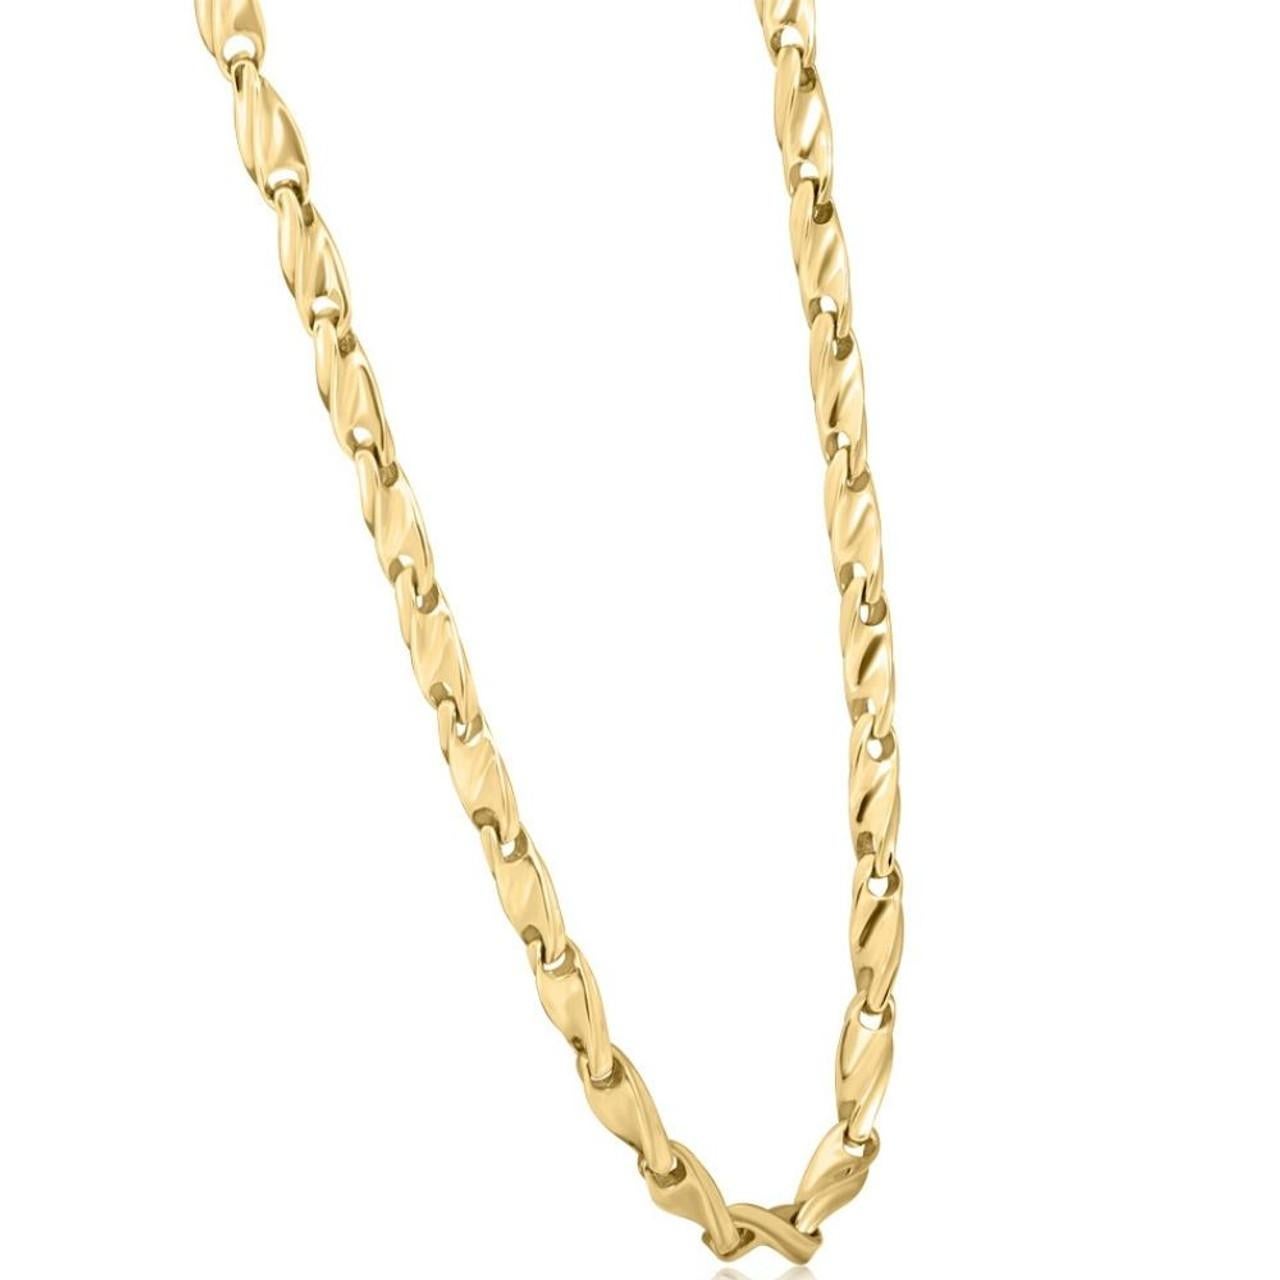 This stunning men's chain necklace is made of solid 14k yellow gold.  The necklace weighs 50.9grams and measures 22